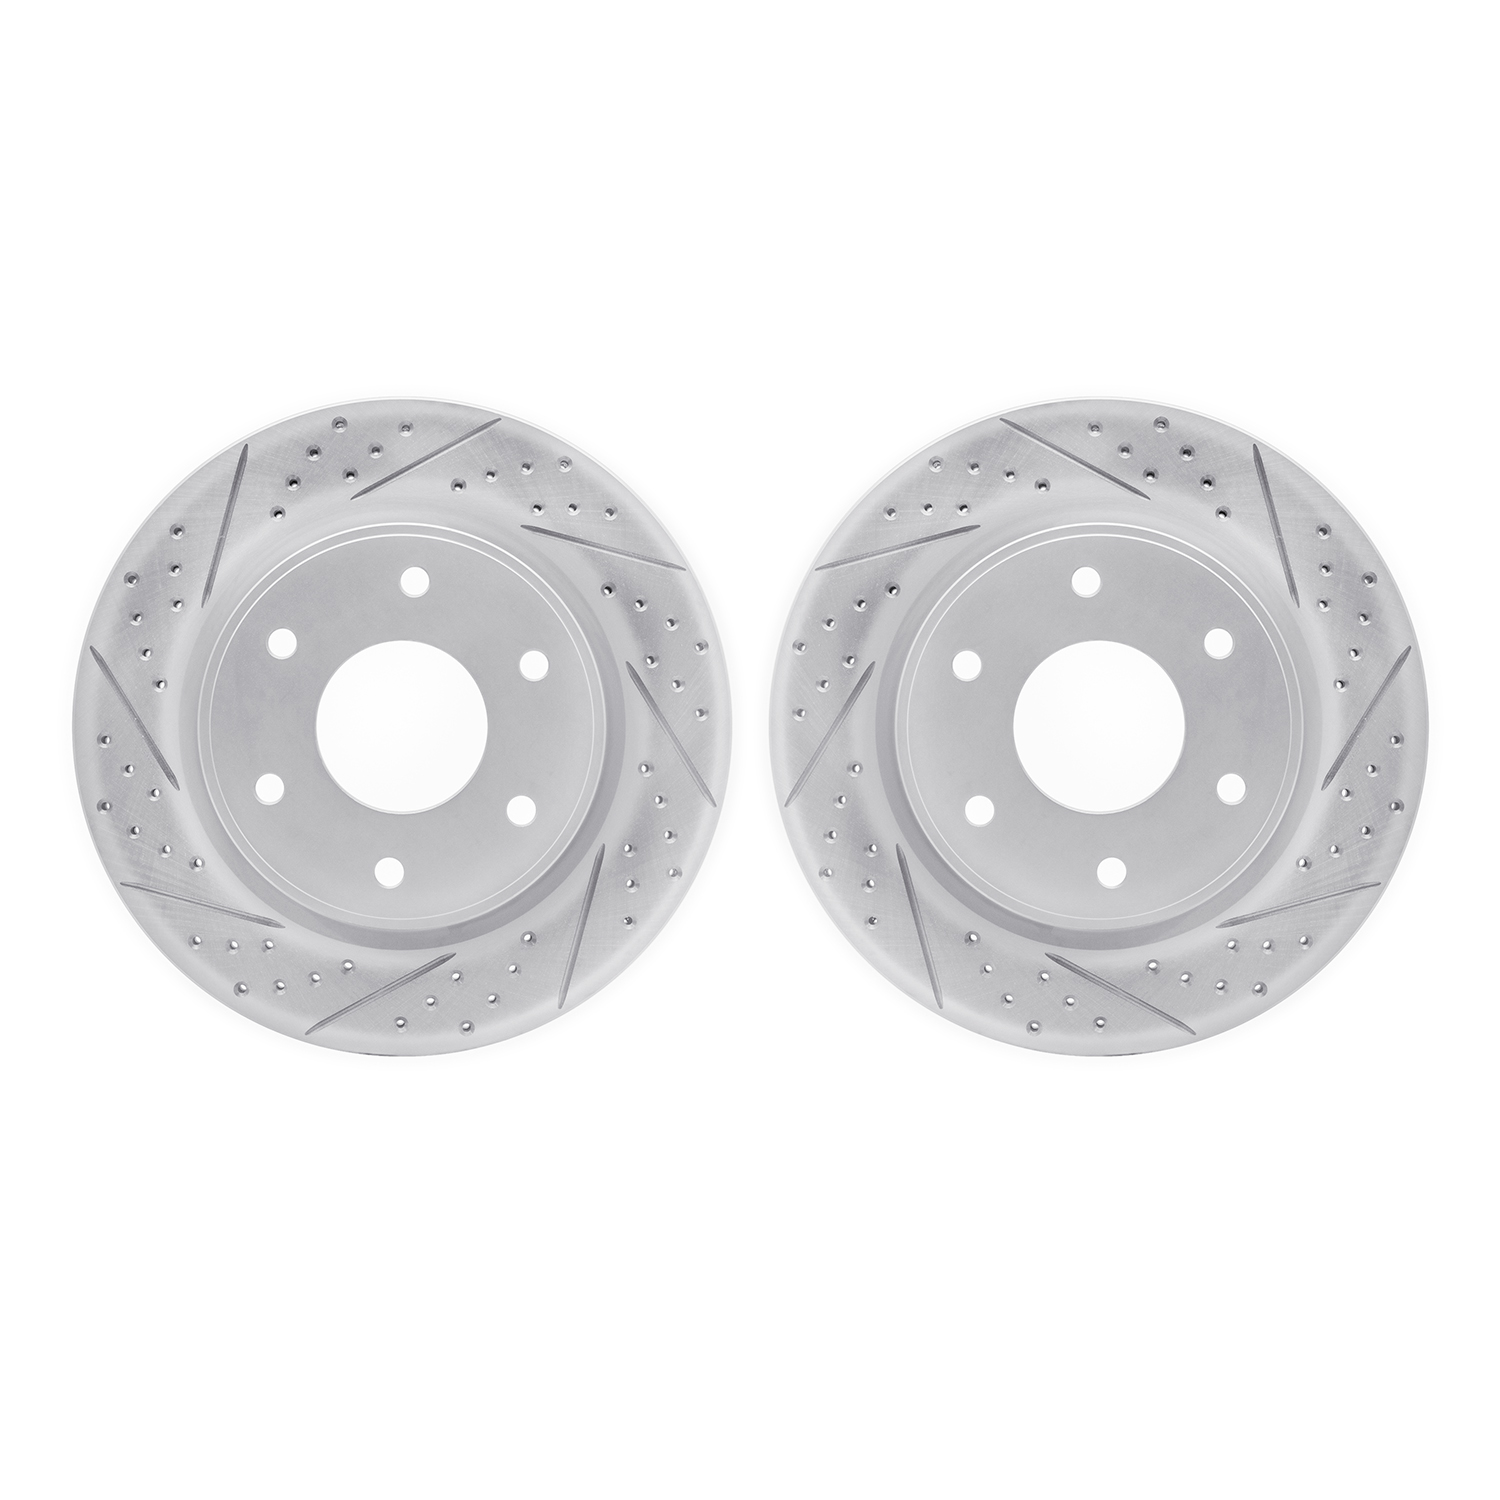 2002-67013 Geoperformance Drilled/Slotted Brake Rotors, 2005-2007 Infiniti/Nissan, Position: Front